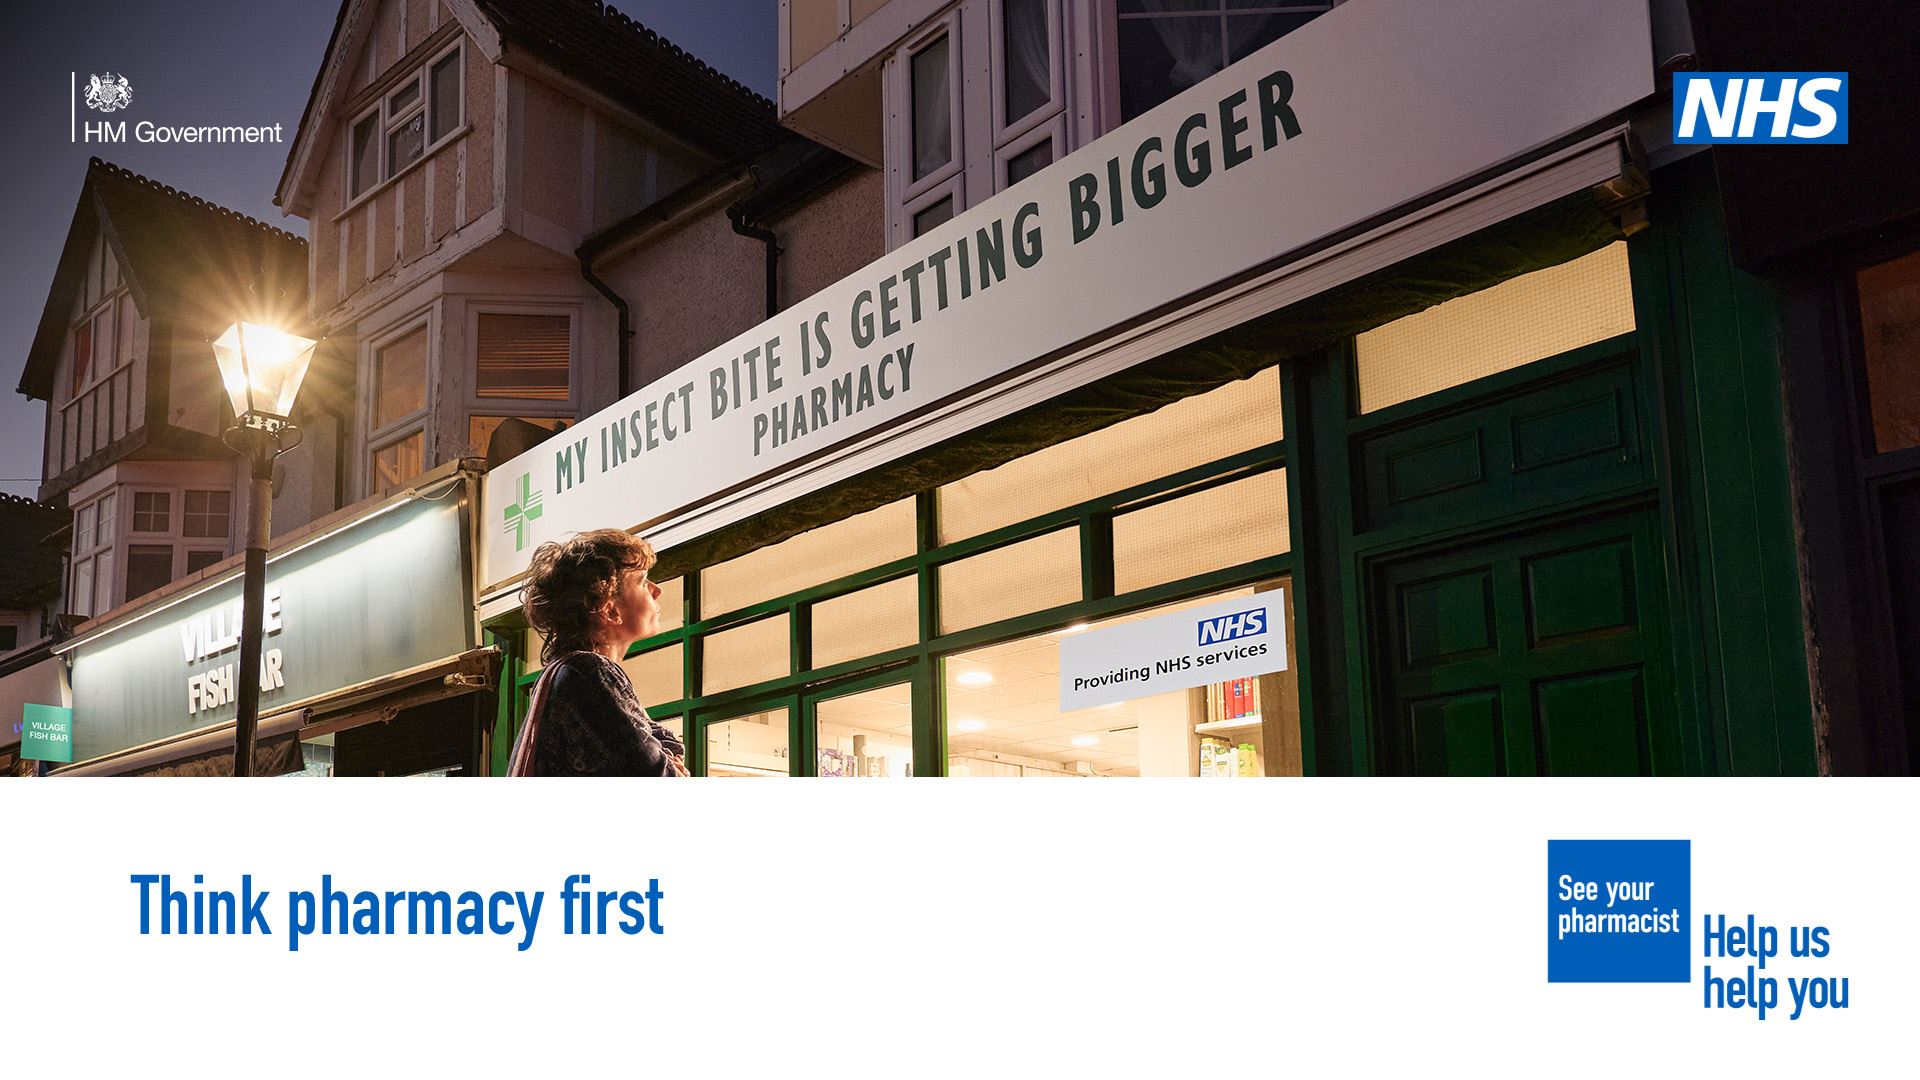 A person is standing outside a pharmacy looking uncomfortable. The sign above the pharmacy reads 'My insect bite is getting worse pharmacy'   A lower third box features in the bottom on the image. Text in the box reads: 'Think pharmacy first'